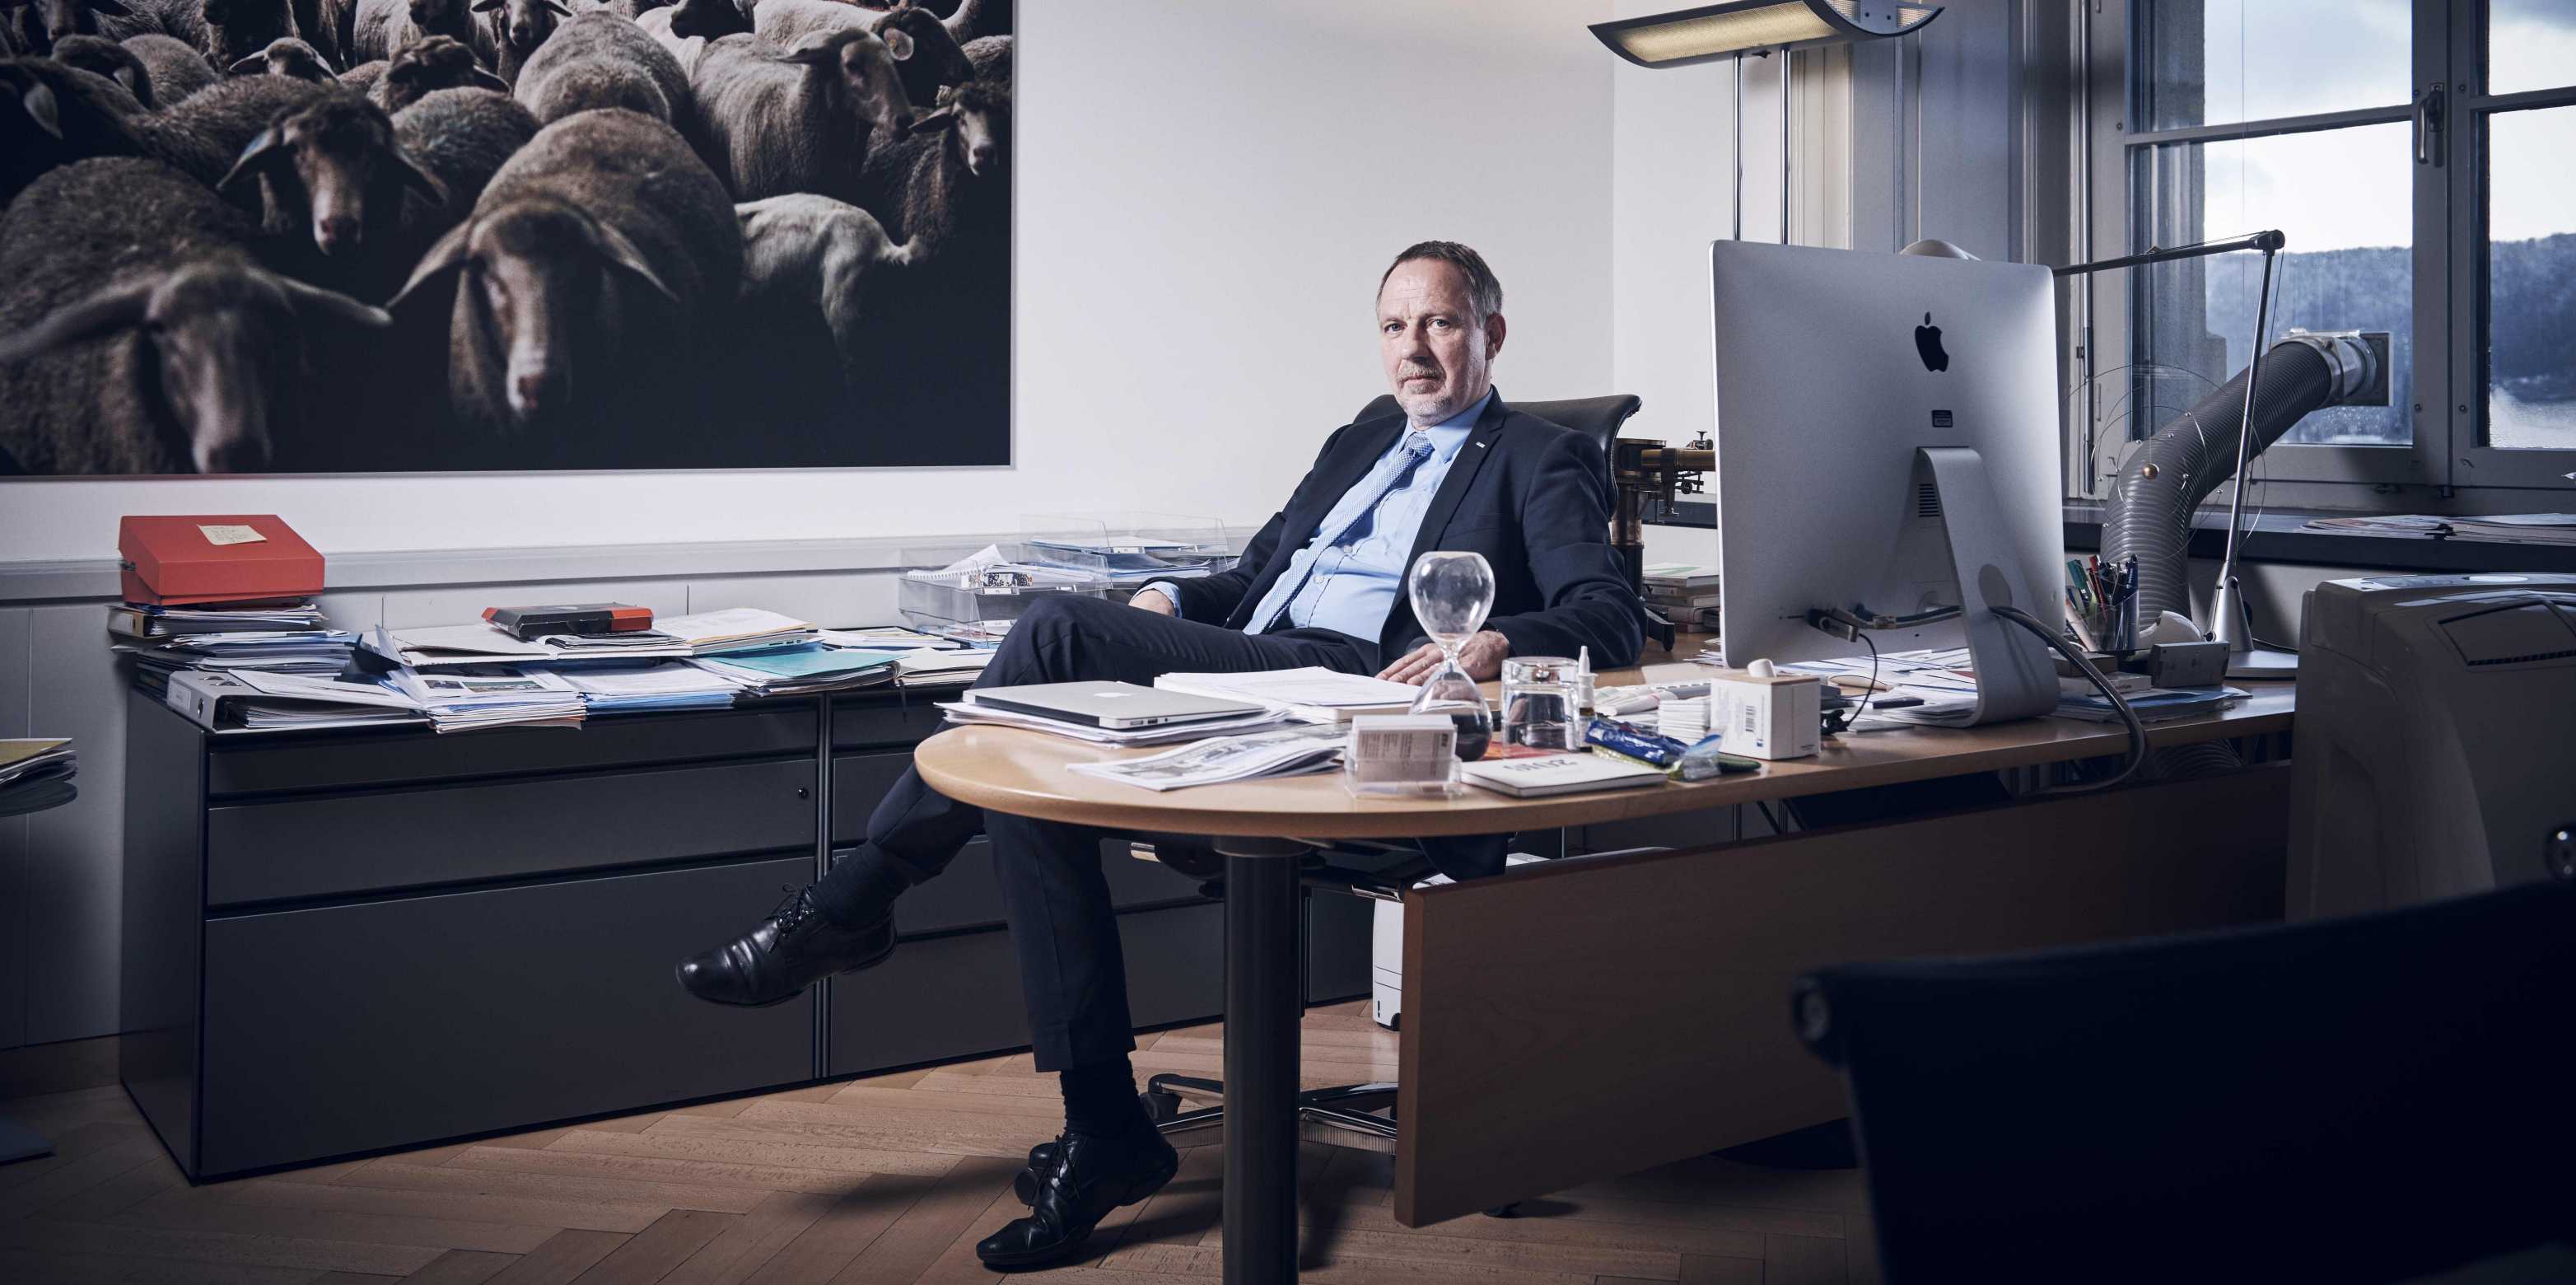 Detlef Günther is sitting in his office in a suit. In the back, there is a picture of a flock of sheep.